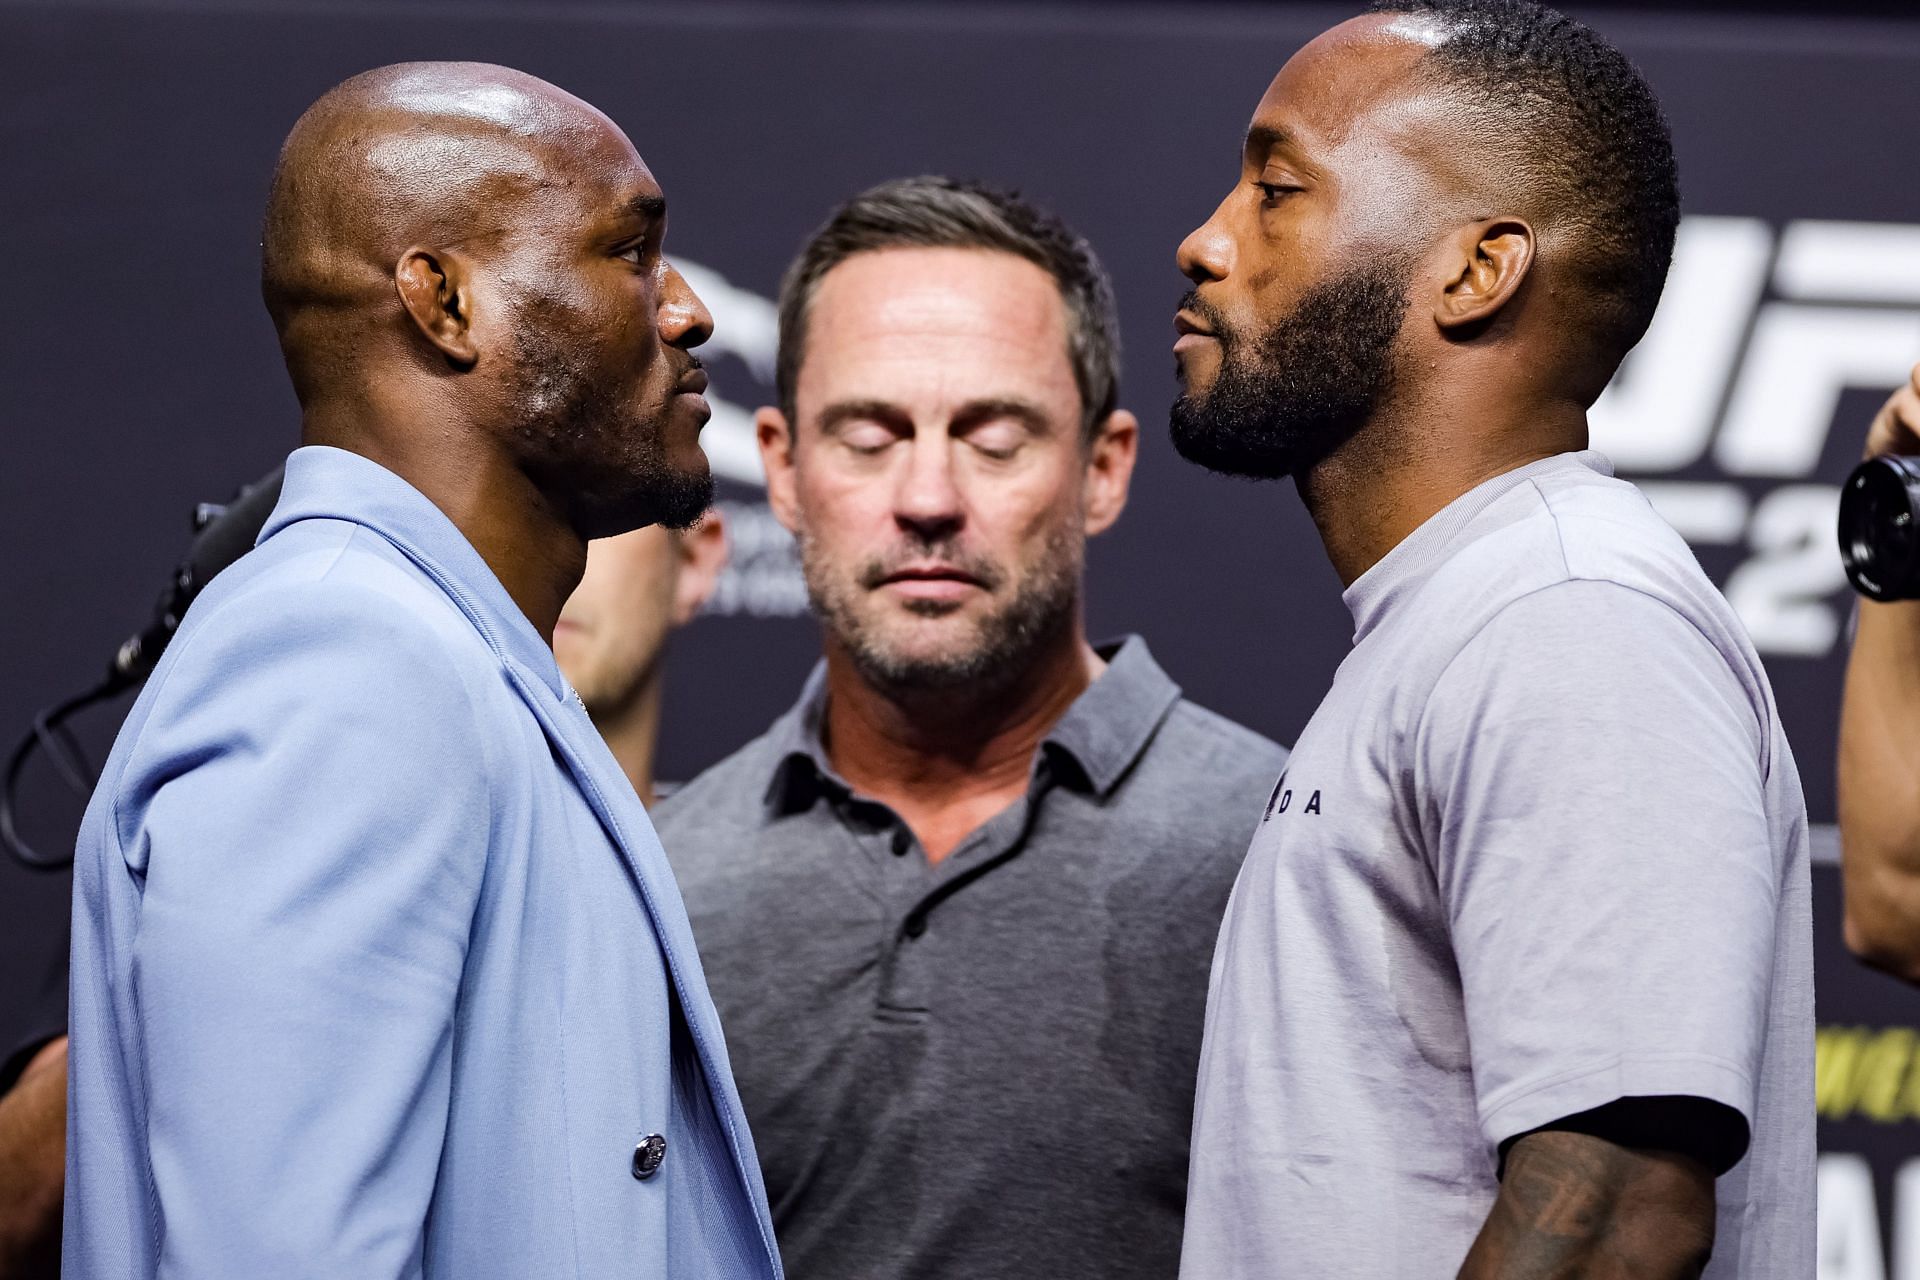 Kamaru Usman (left) and Leon Edwards (right) at the UFC 278 Press Conference Face-off